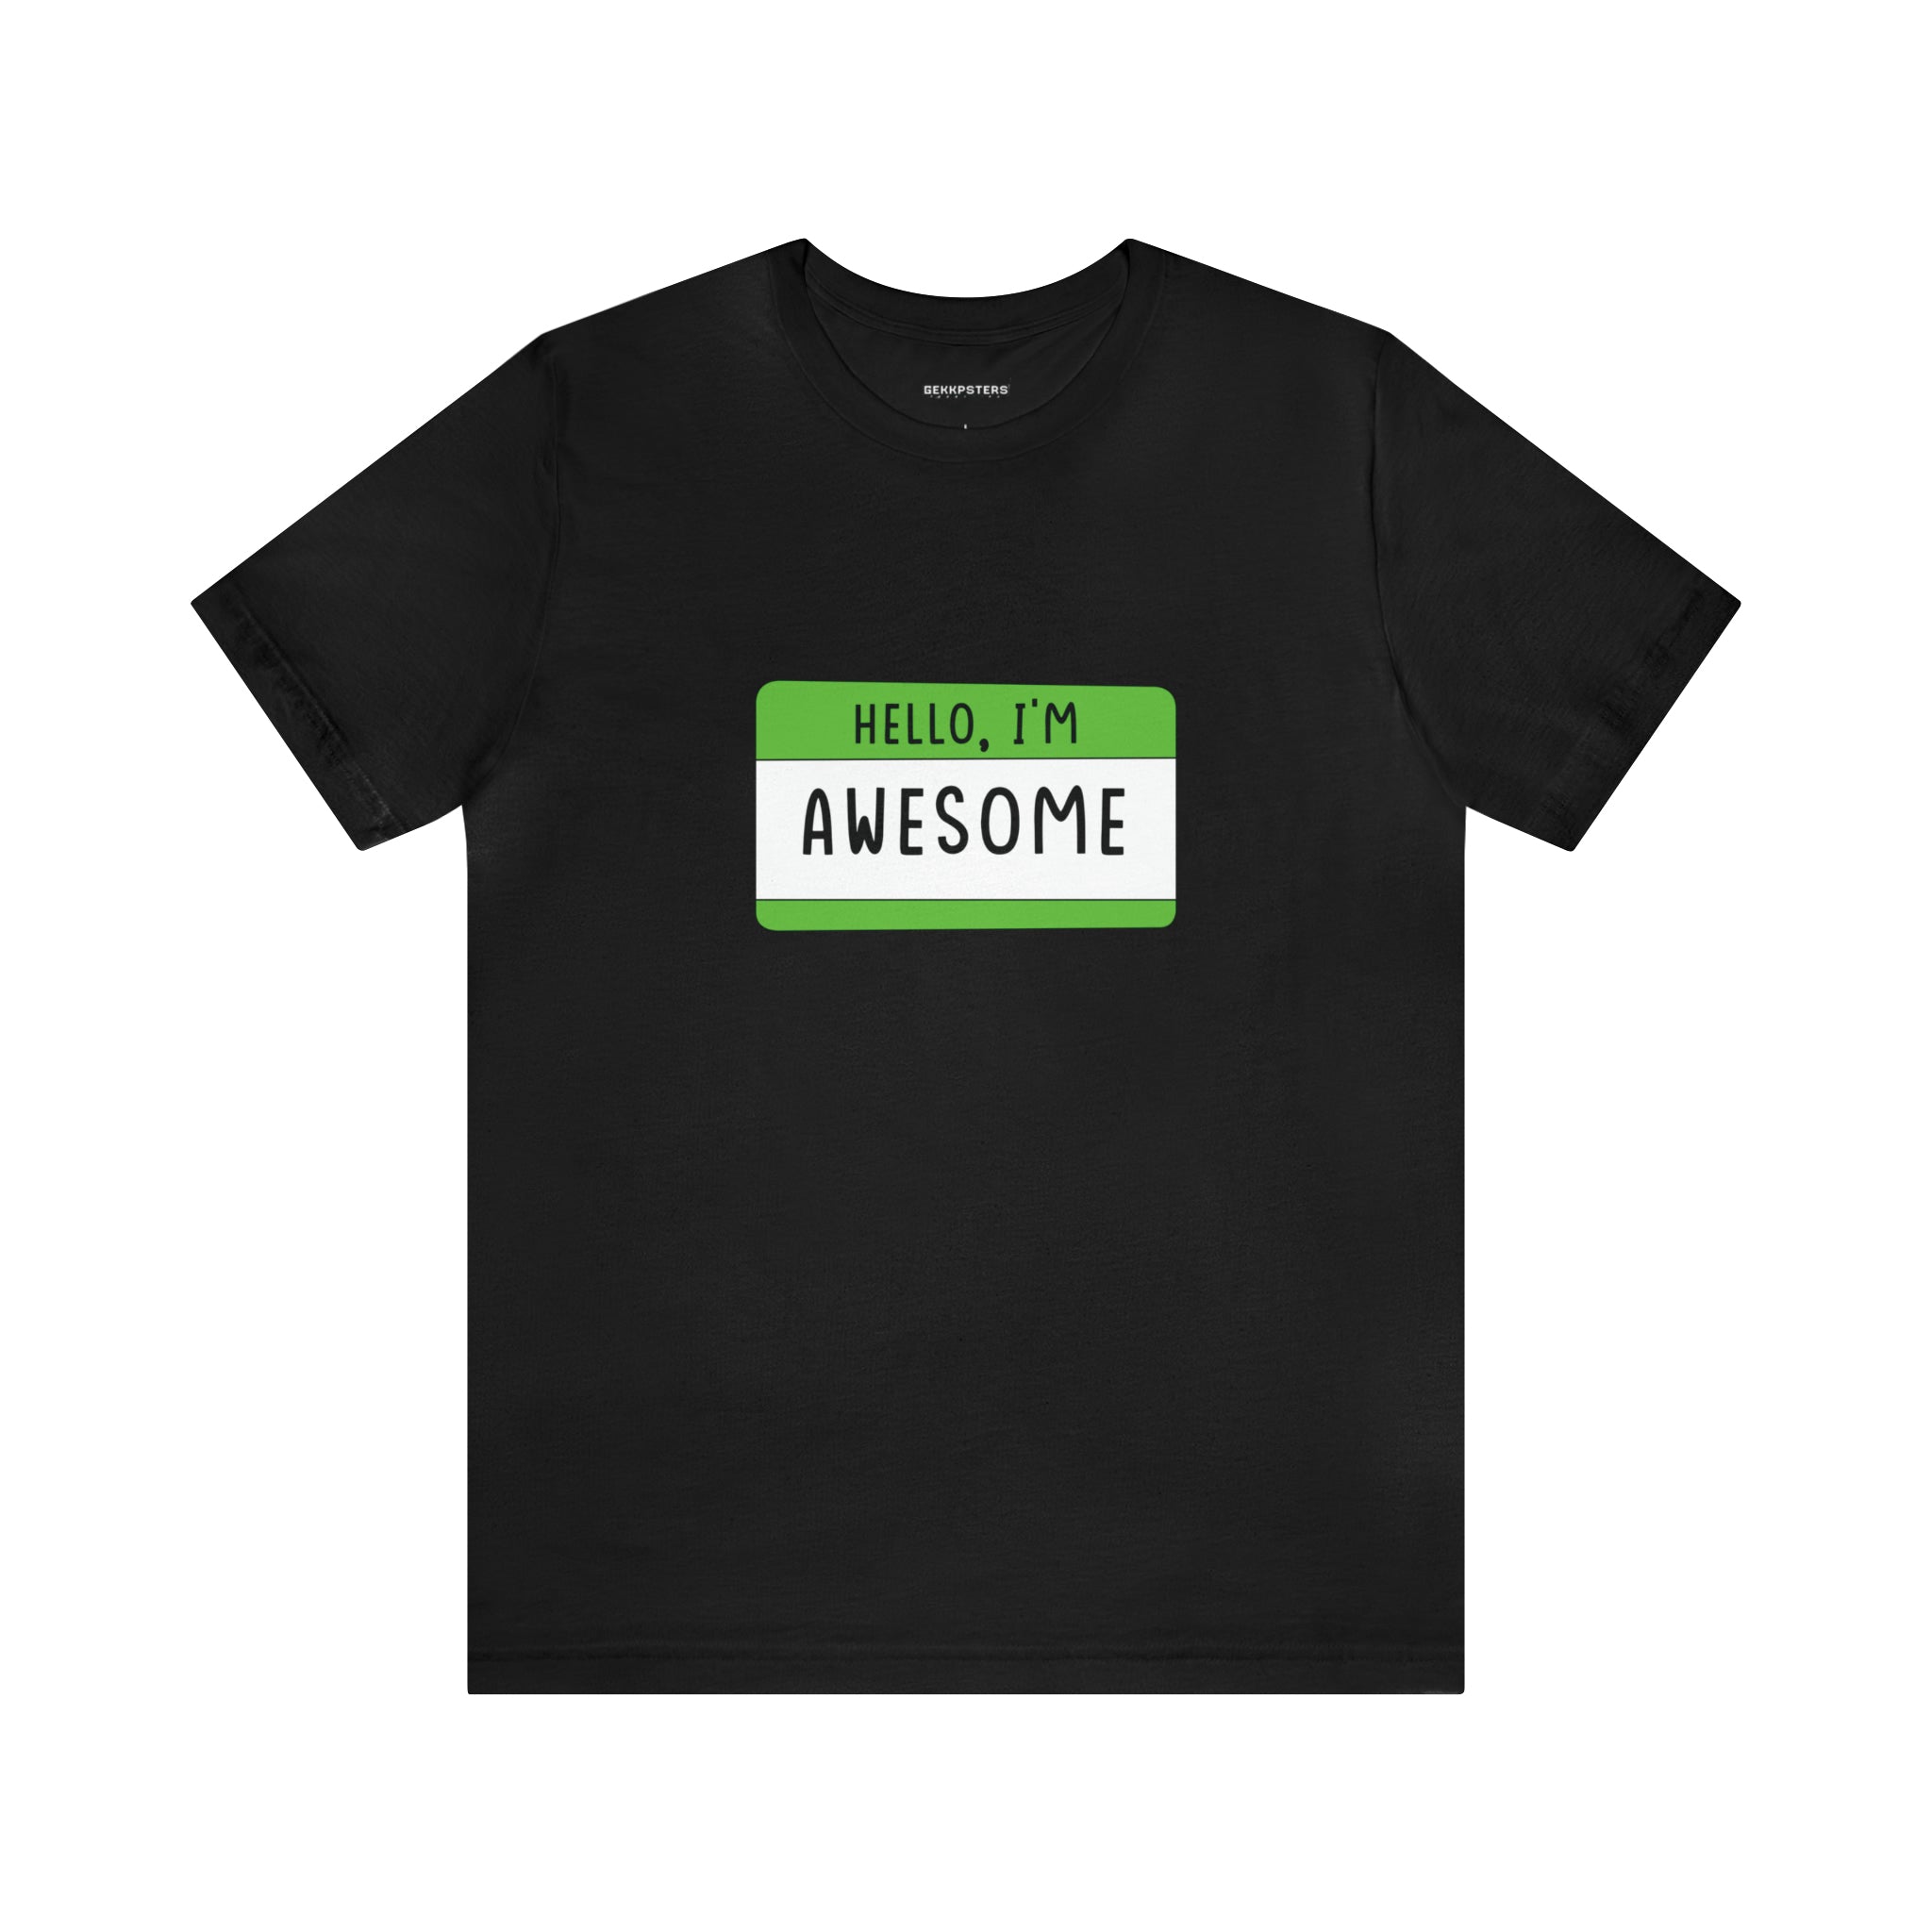 Hello, I'm Awesome T-Shirt with a green name tag graphic that reads "hello, I'm awesome" on the chest, perfect for geeks and gamers.